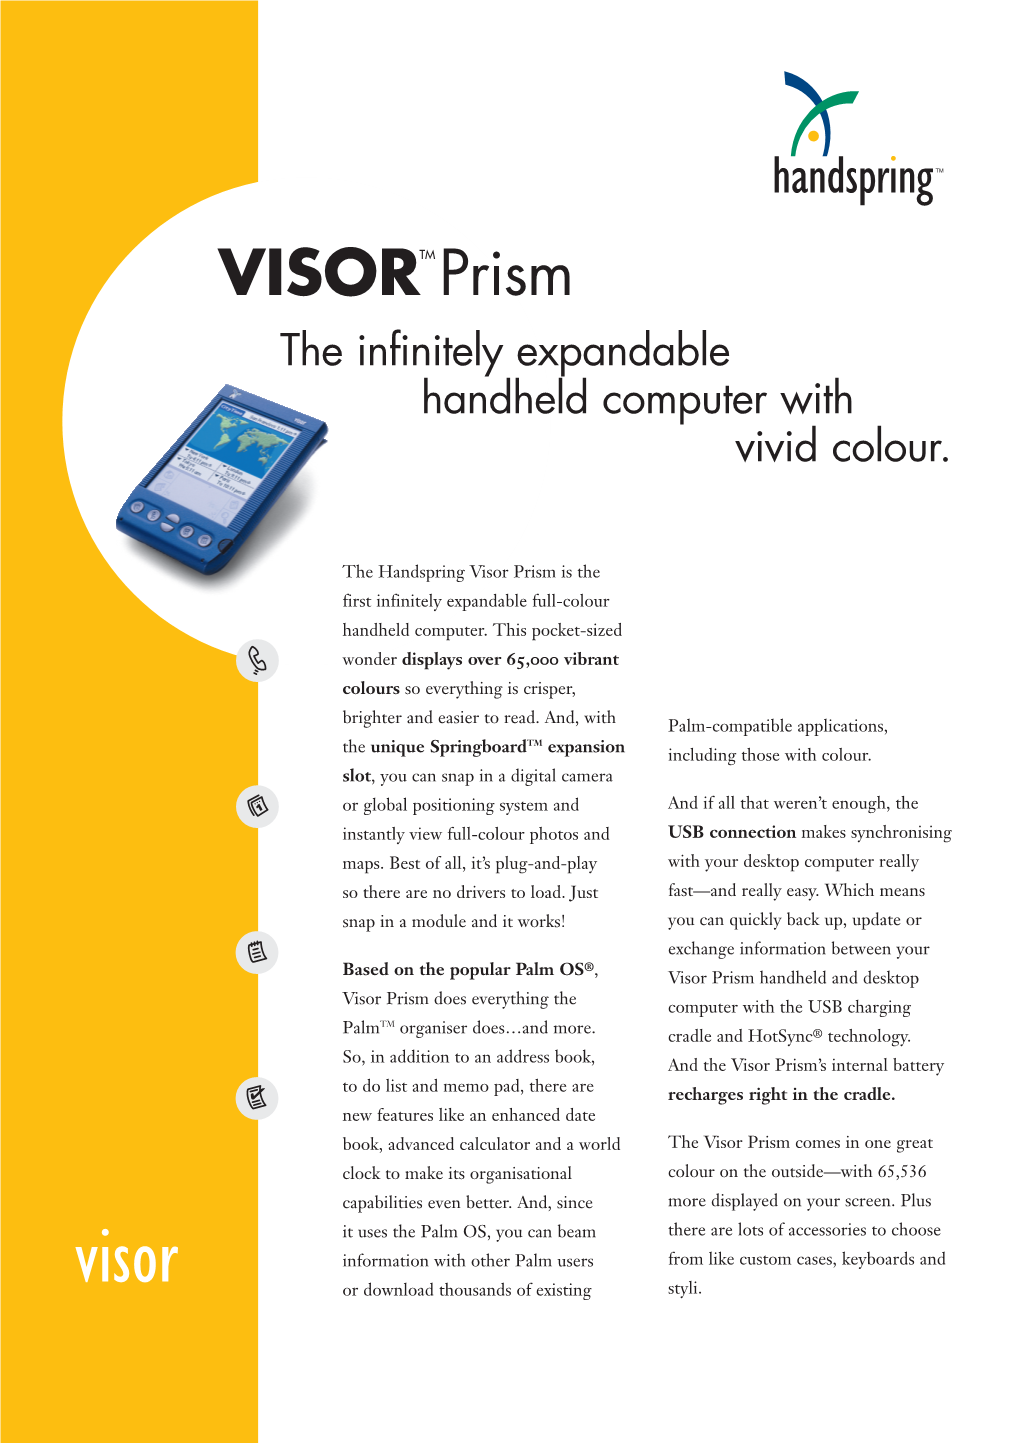 VISORTM Prism the Infinitely Expandable Handheld Computer with Vivid Colour